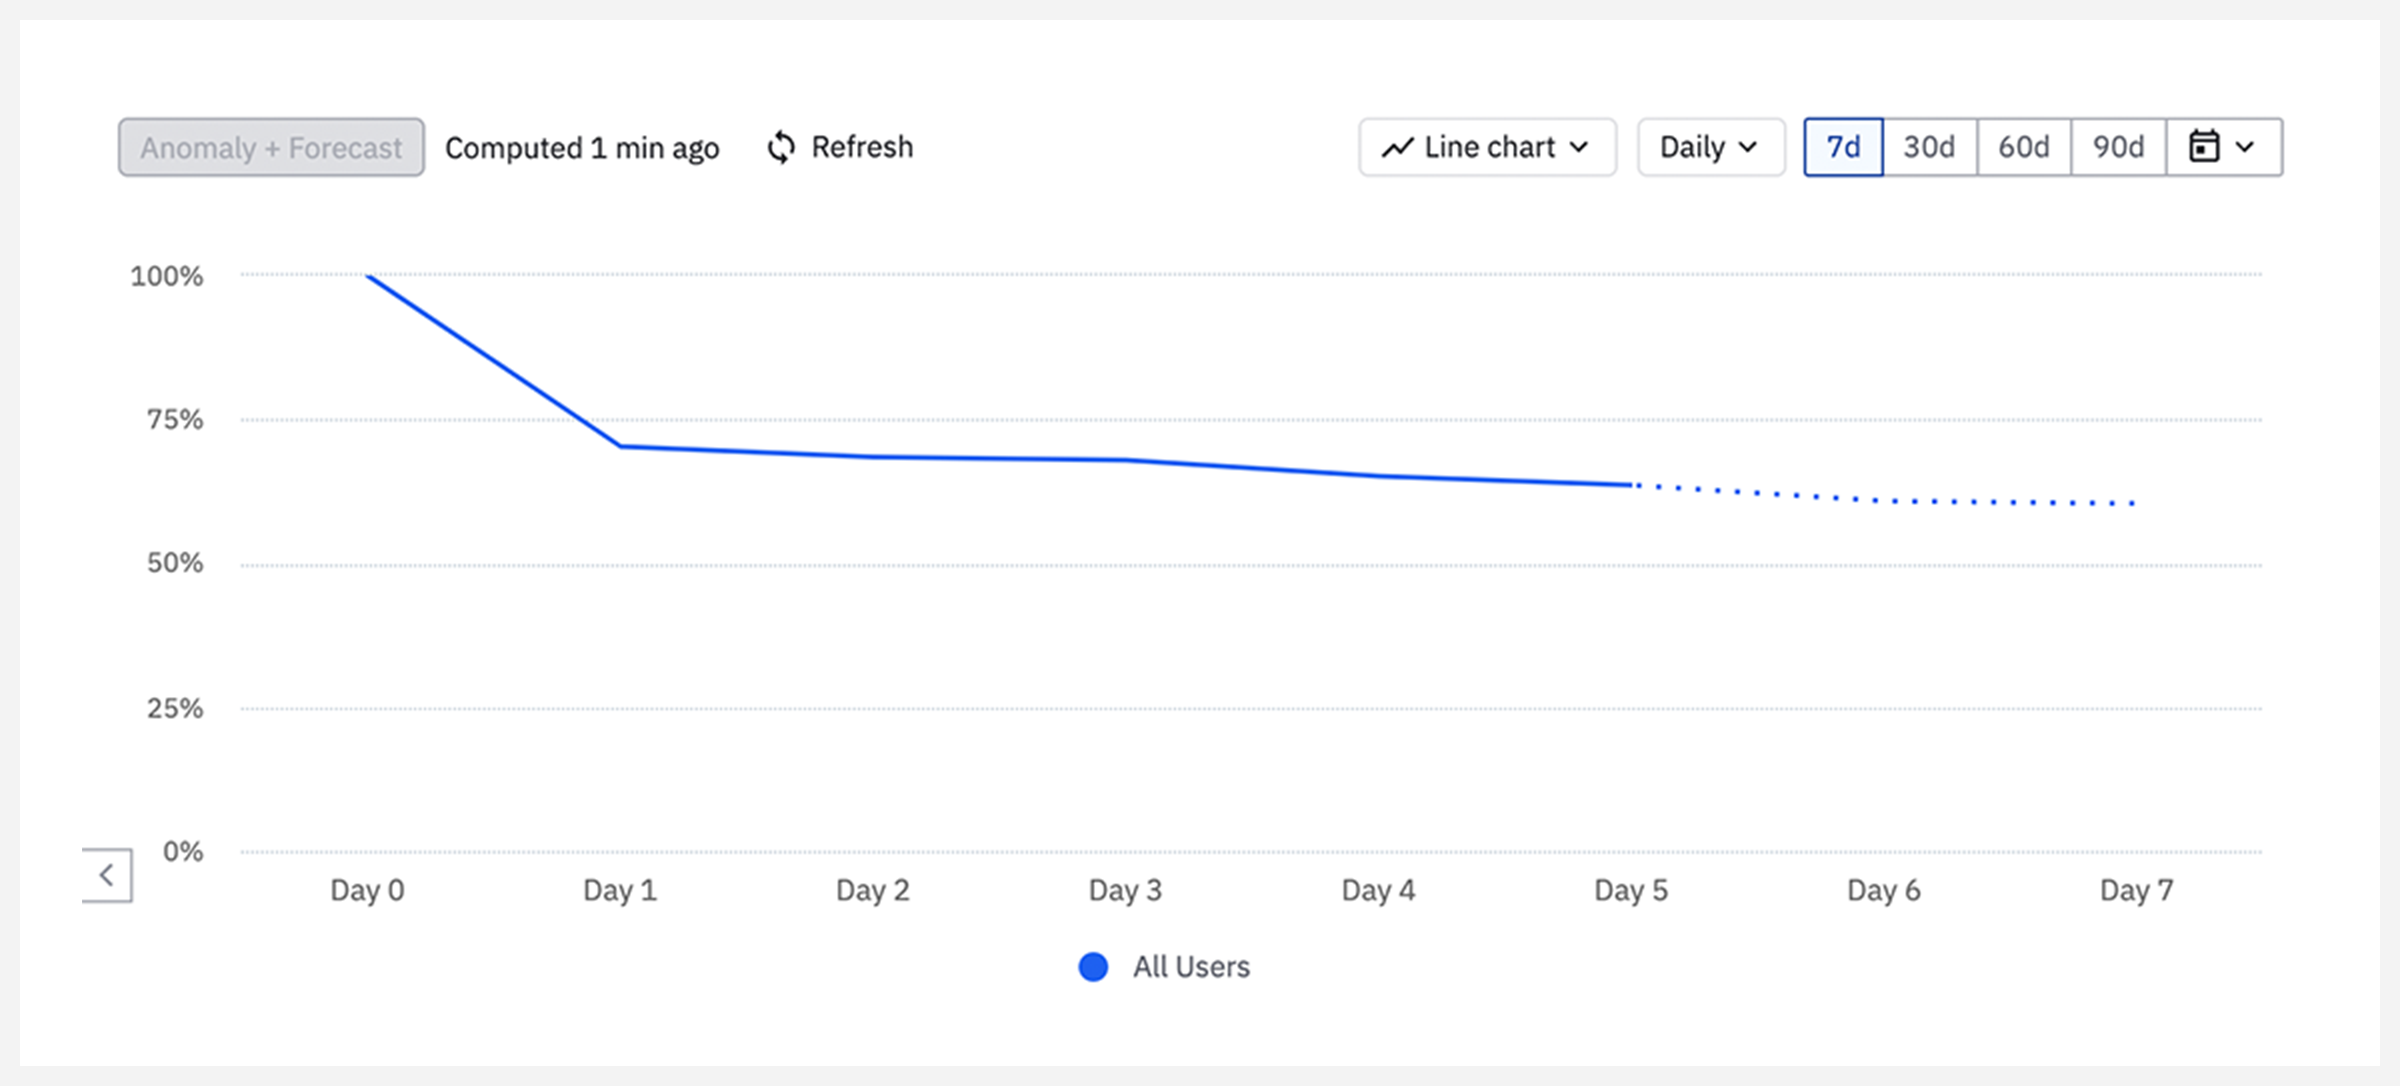 “Return on” retention shows how many users return after a number of days.